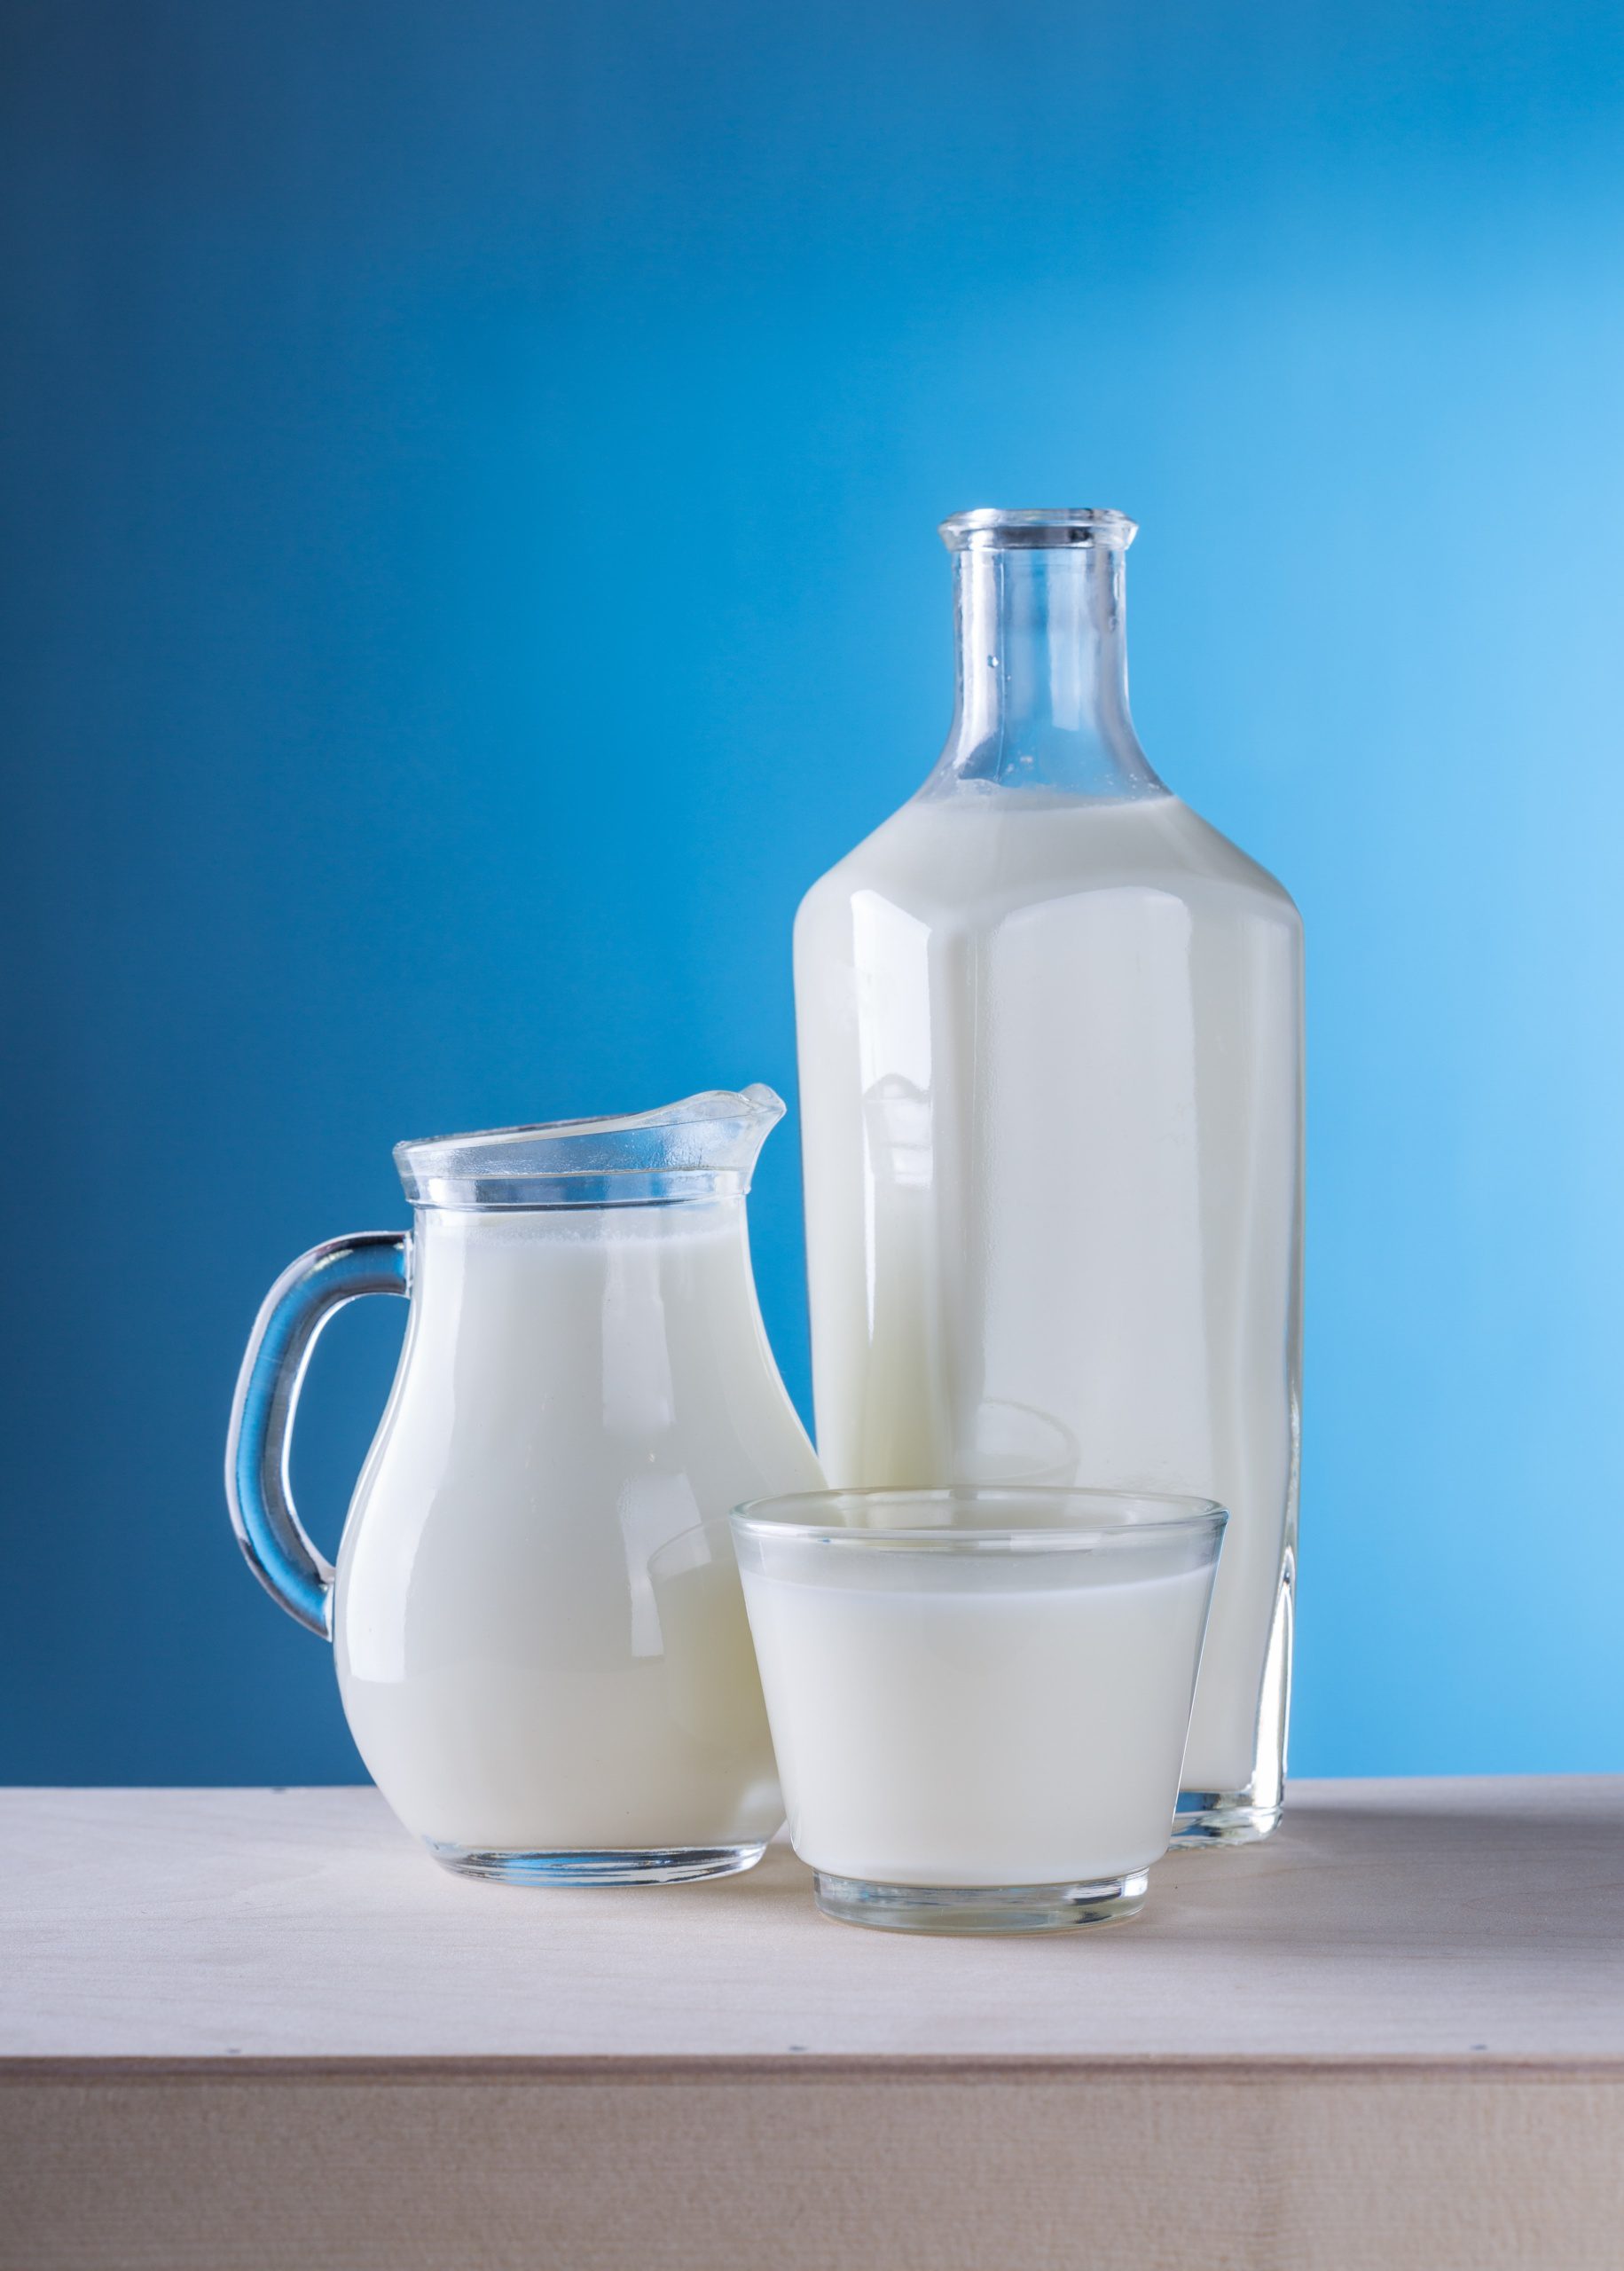 Milk and dairy products - 24 Harmful Foods For Pets